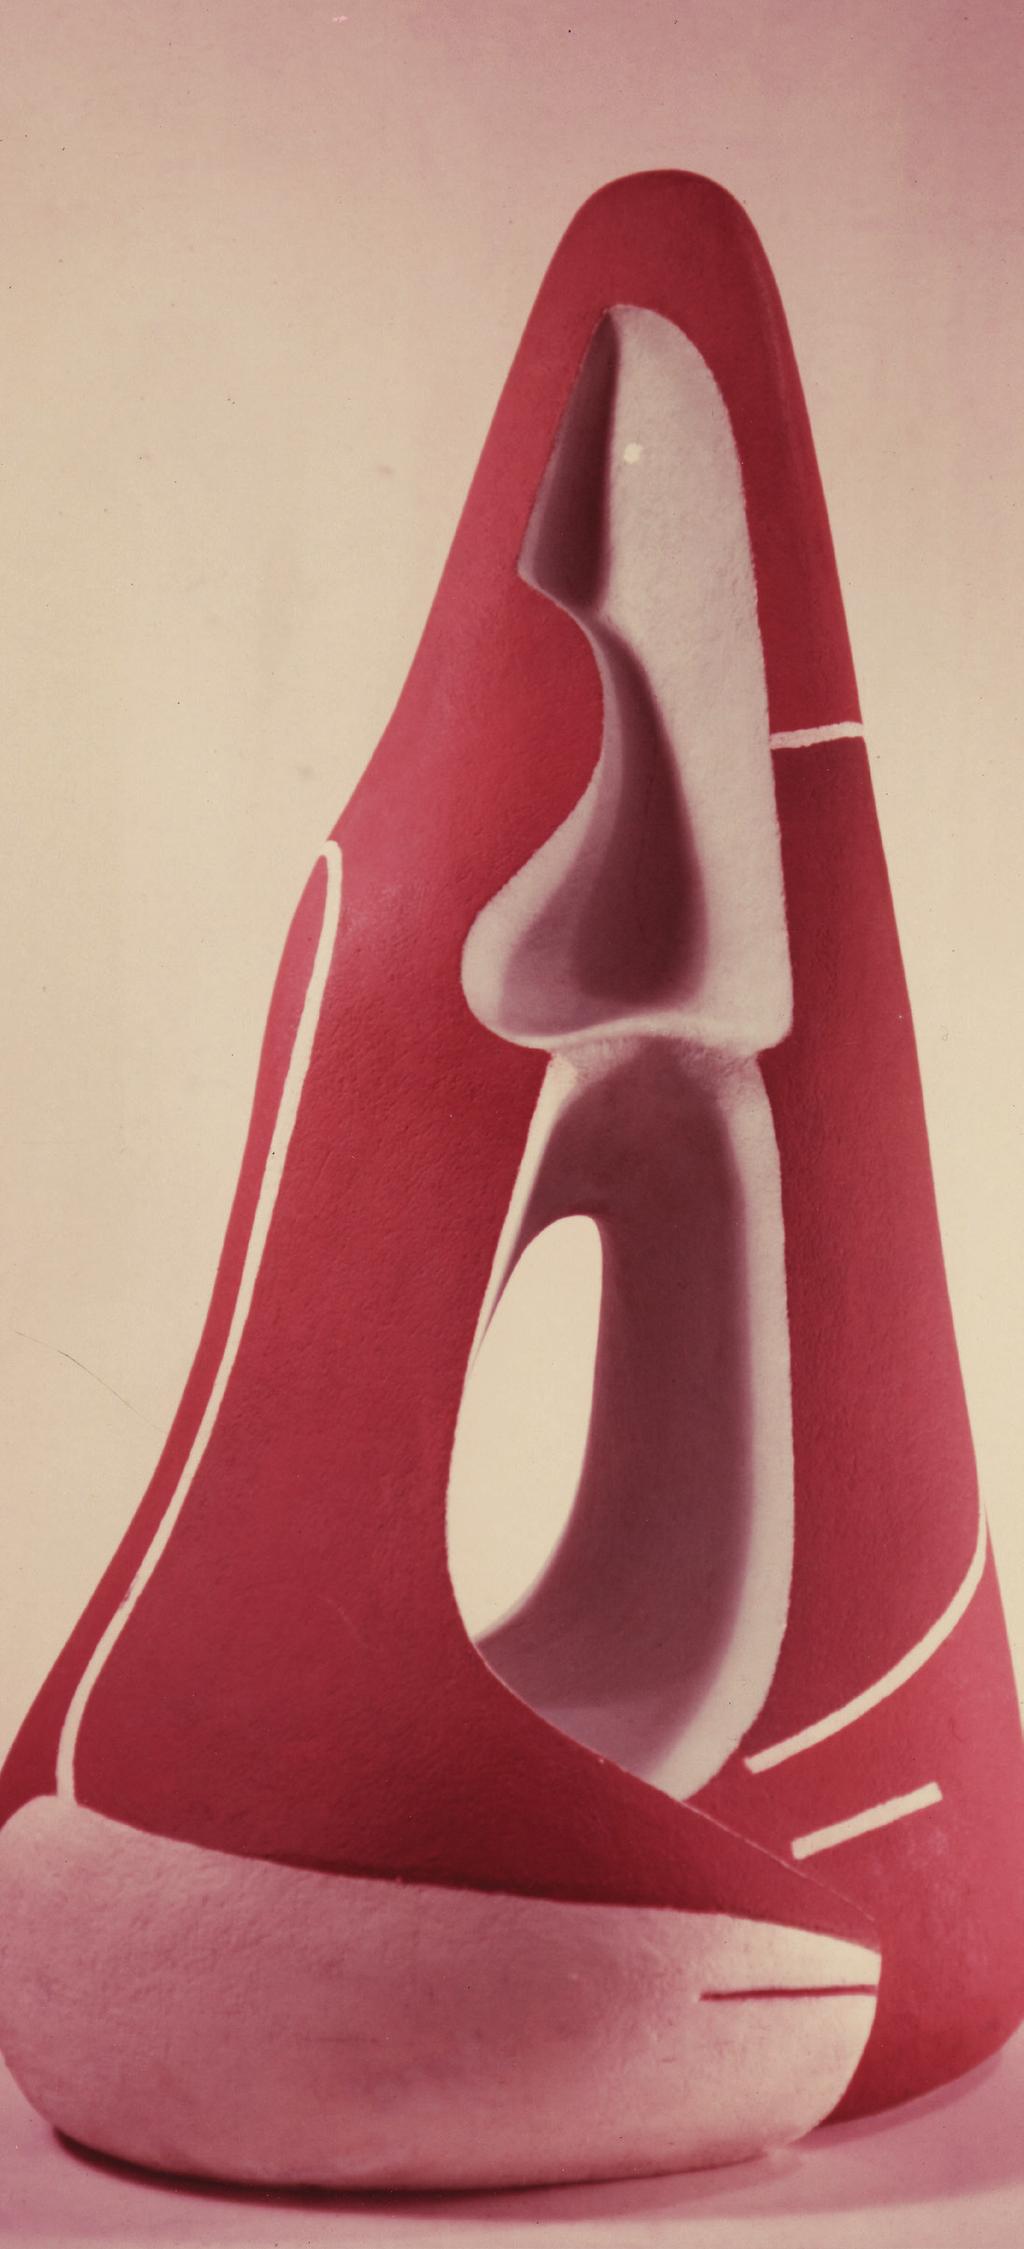 archipenko A Modern Never-before-exhibited examples from the artist s archives, including annotated photographs of sculptures, sketches, installation views, patent drawings for his machine